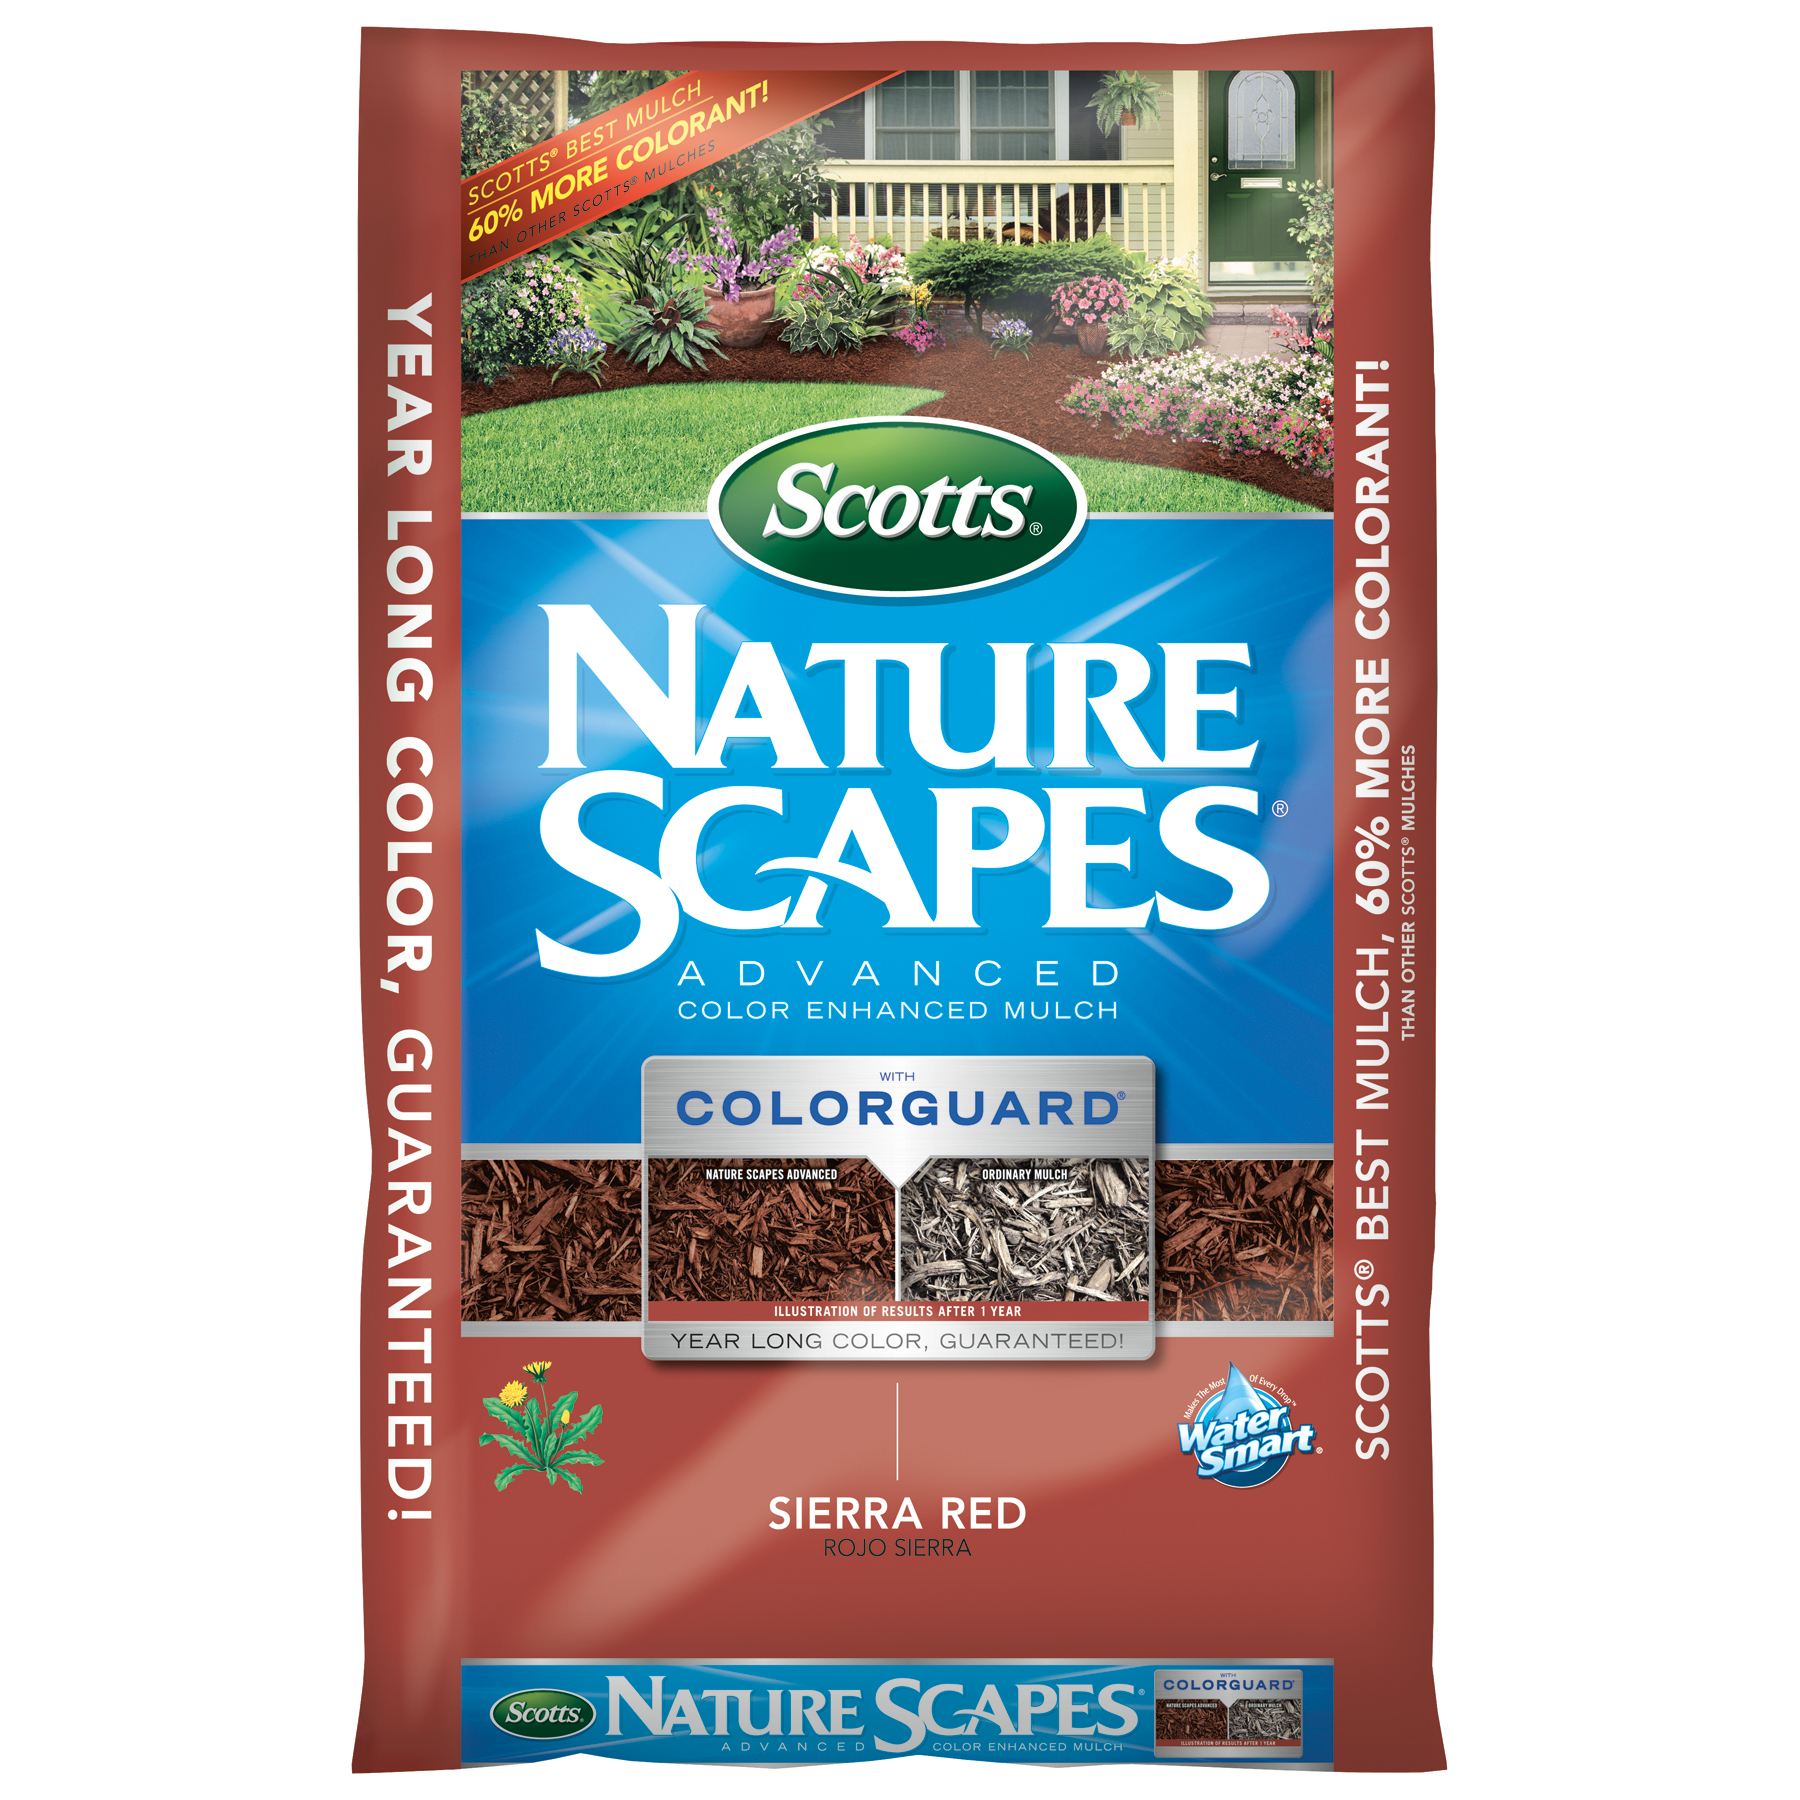 Scotts 88452410 2 cu. ft. Nature Scapes Advanced Color Enhanced Mulch - Sierra Red